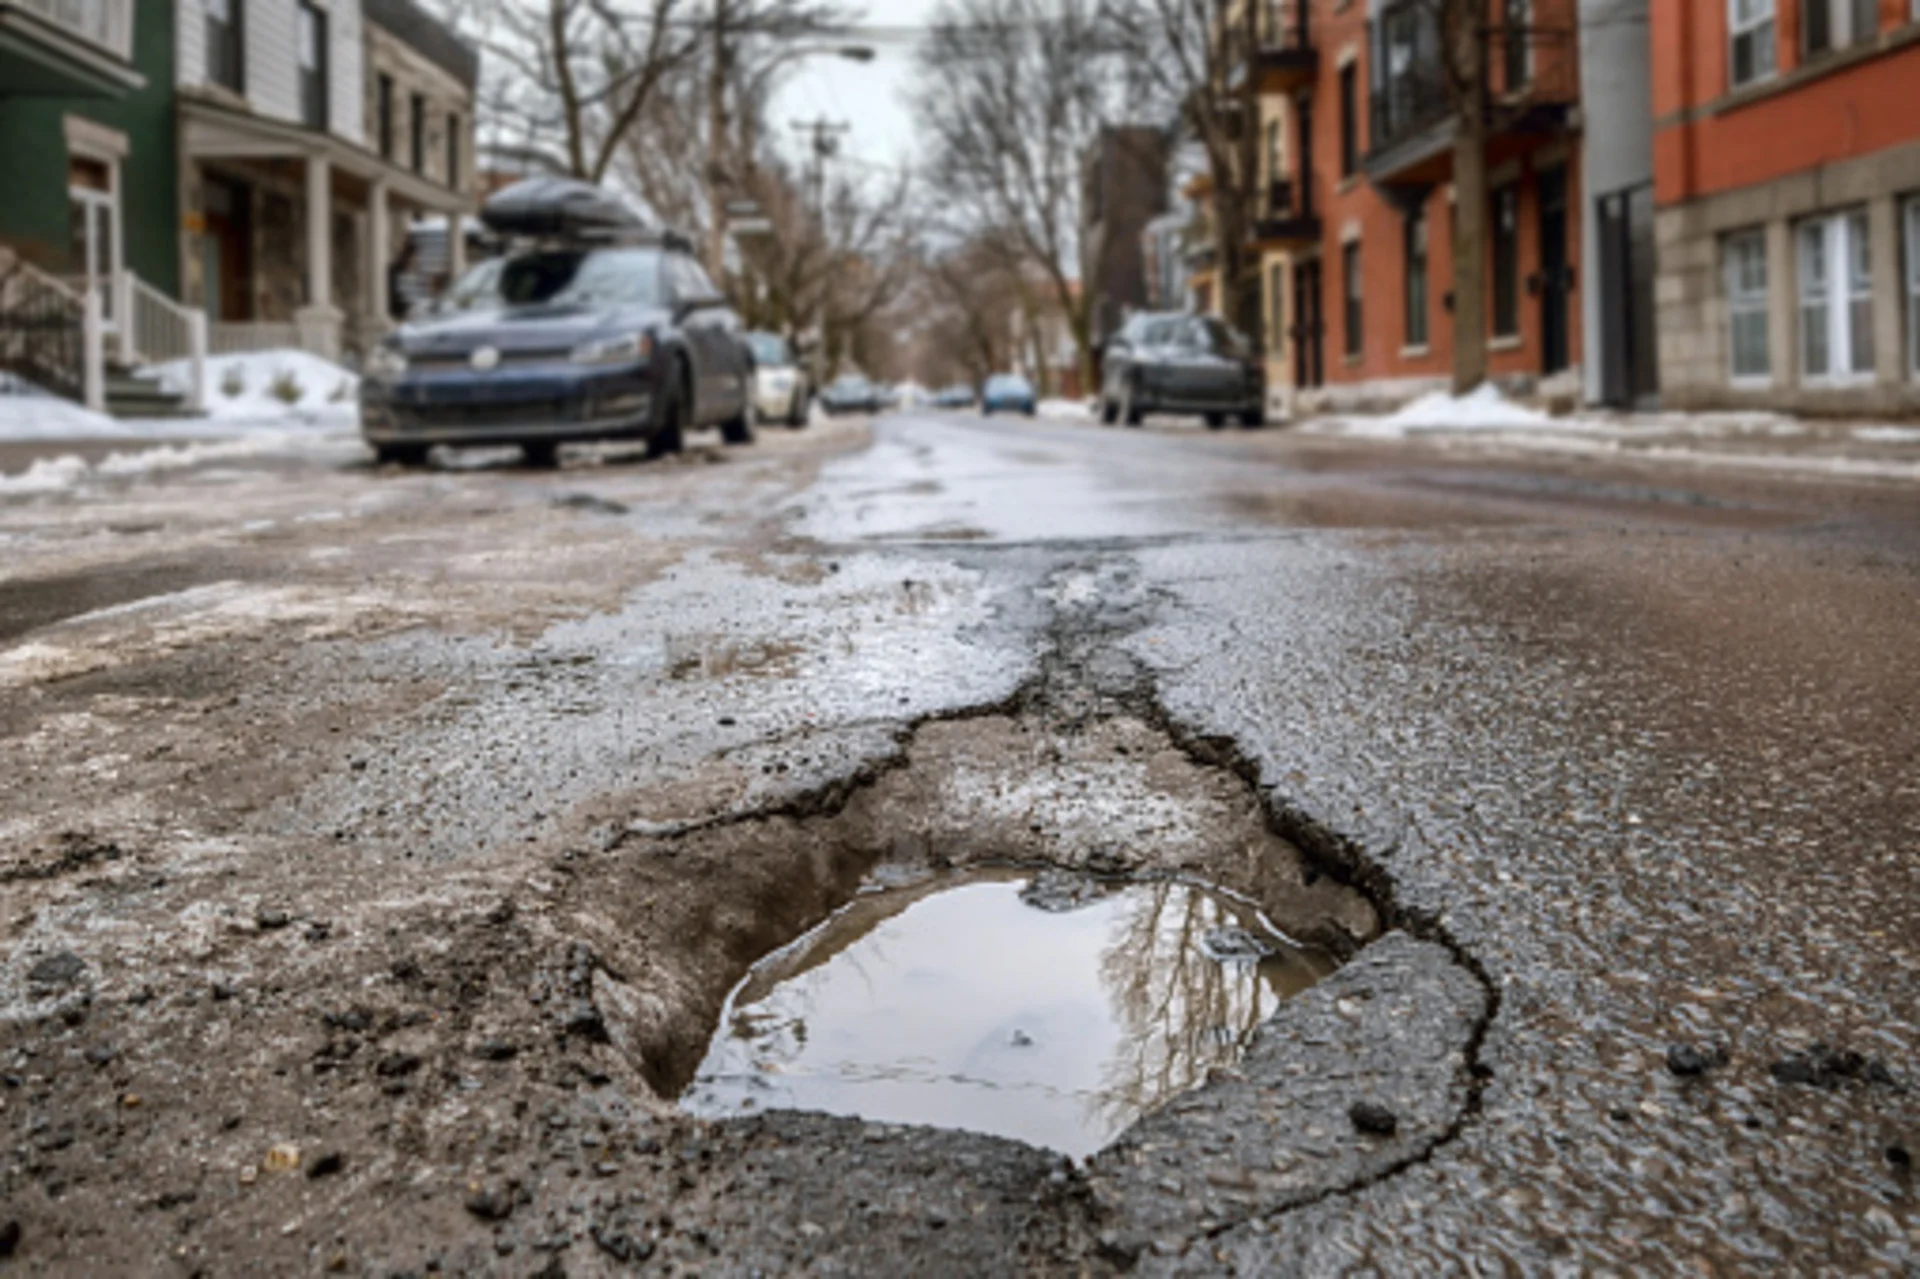 Here it is: The ten worst roads in South Central Ontario